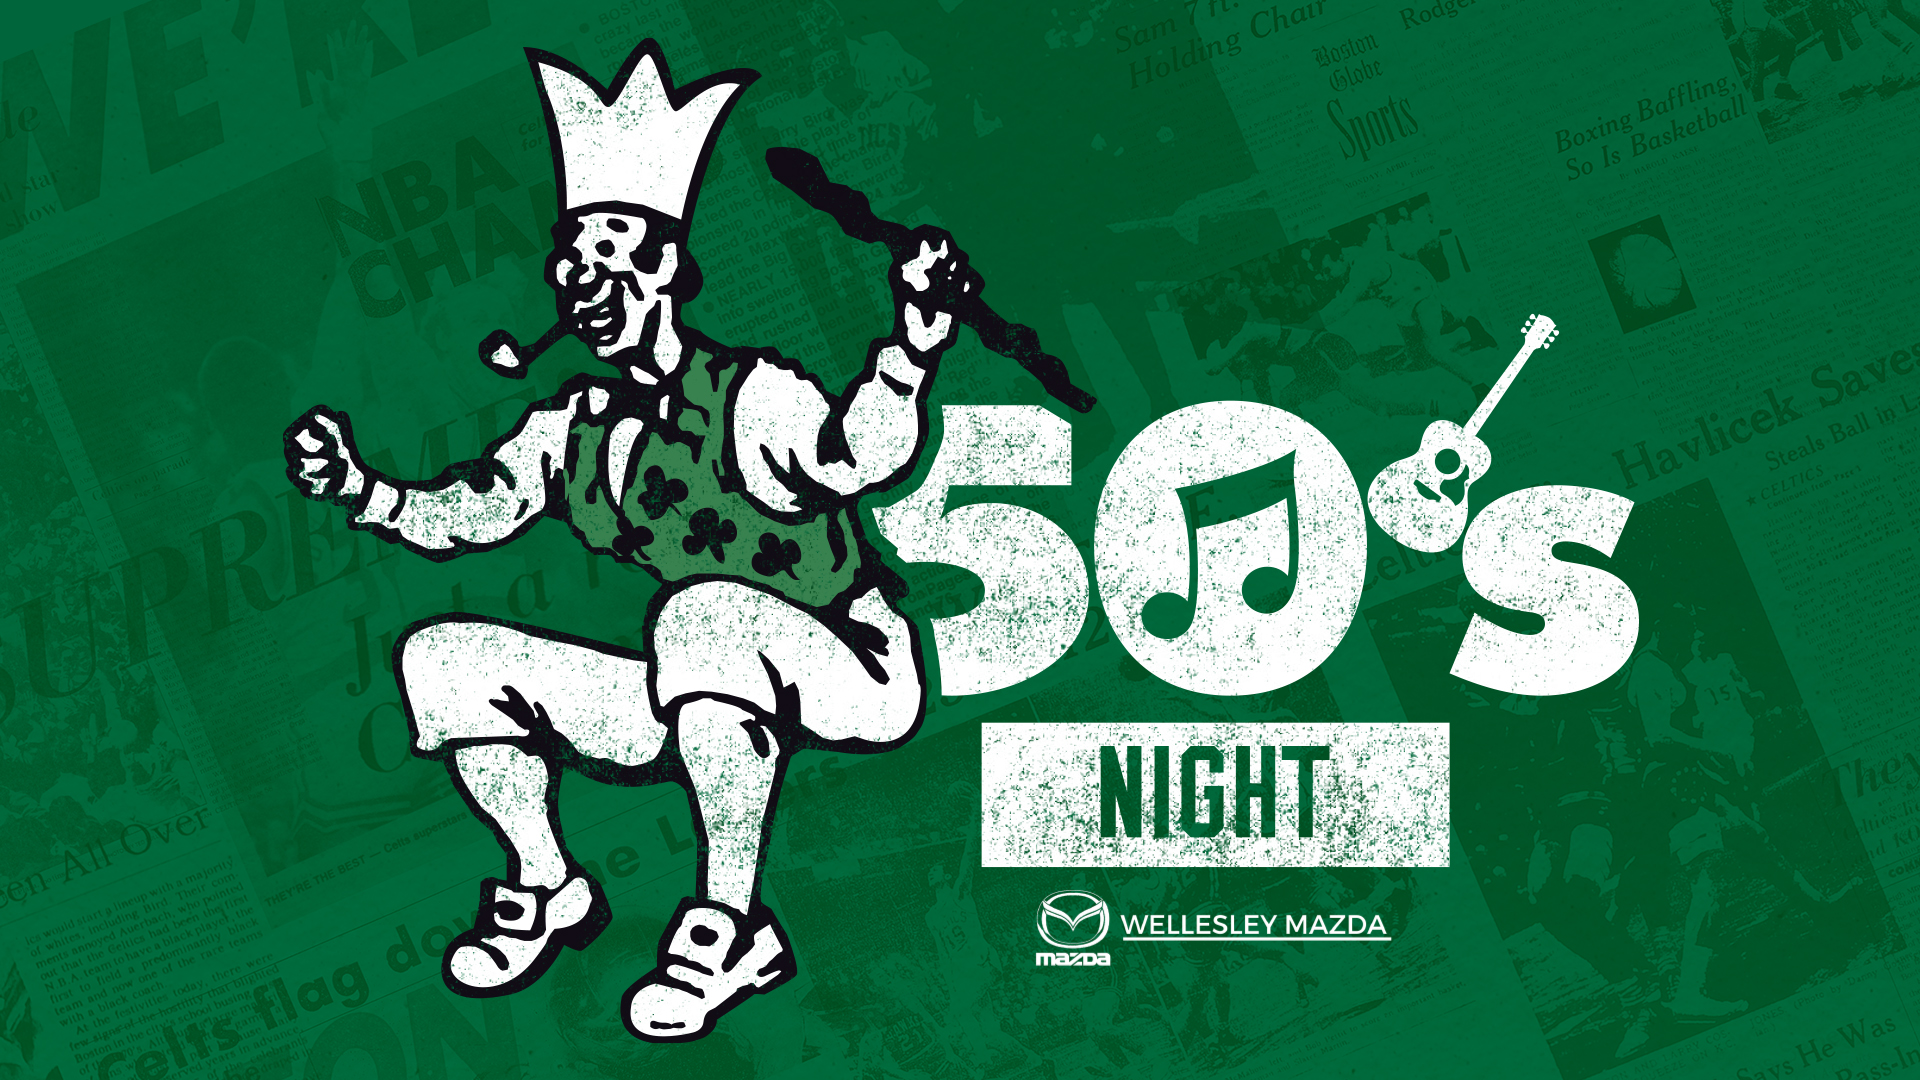 50's Night Presented by Wellesly Mazda